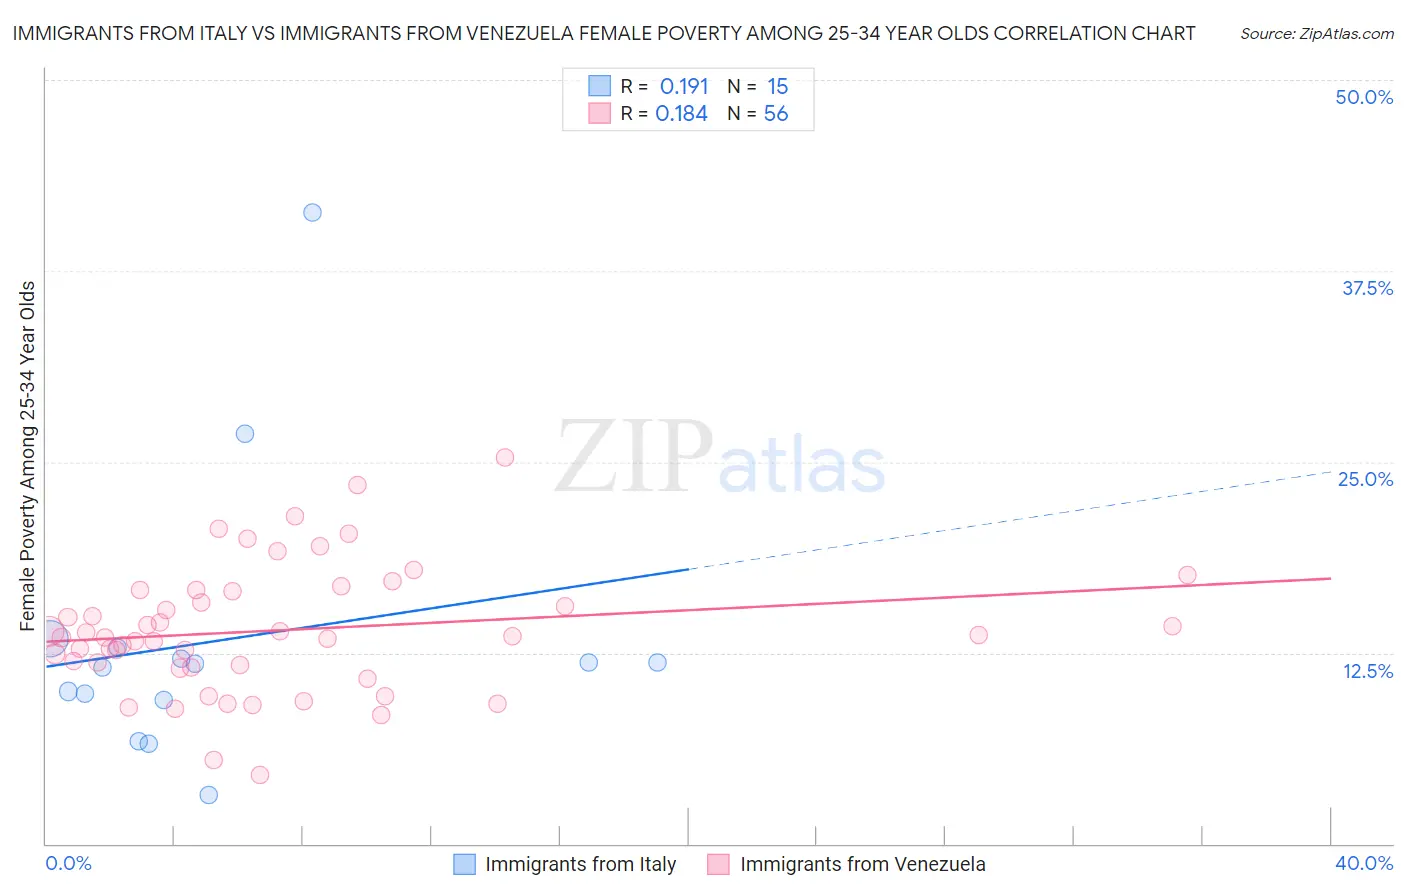 Immigrants from Italy vs Immigrants from Venezuela Female Poverty Among 25-34 Year Olds